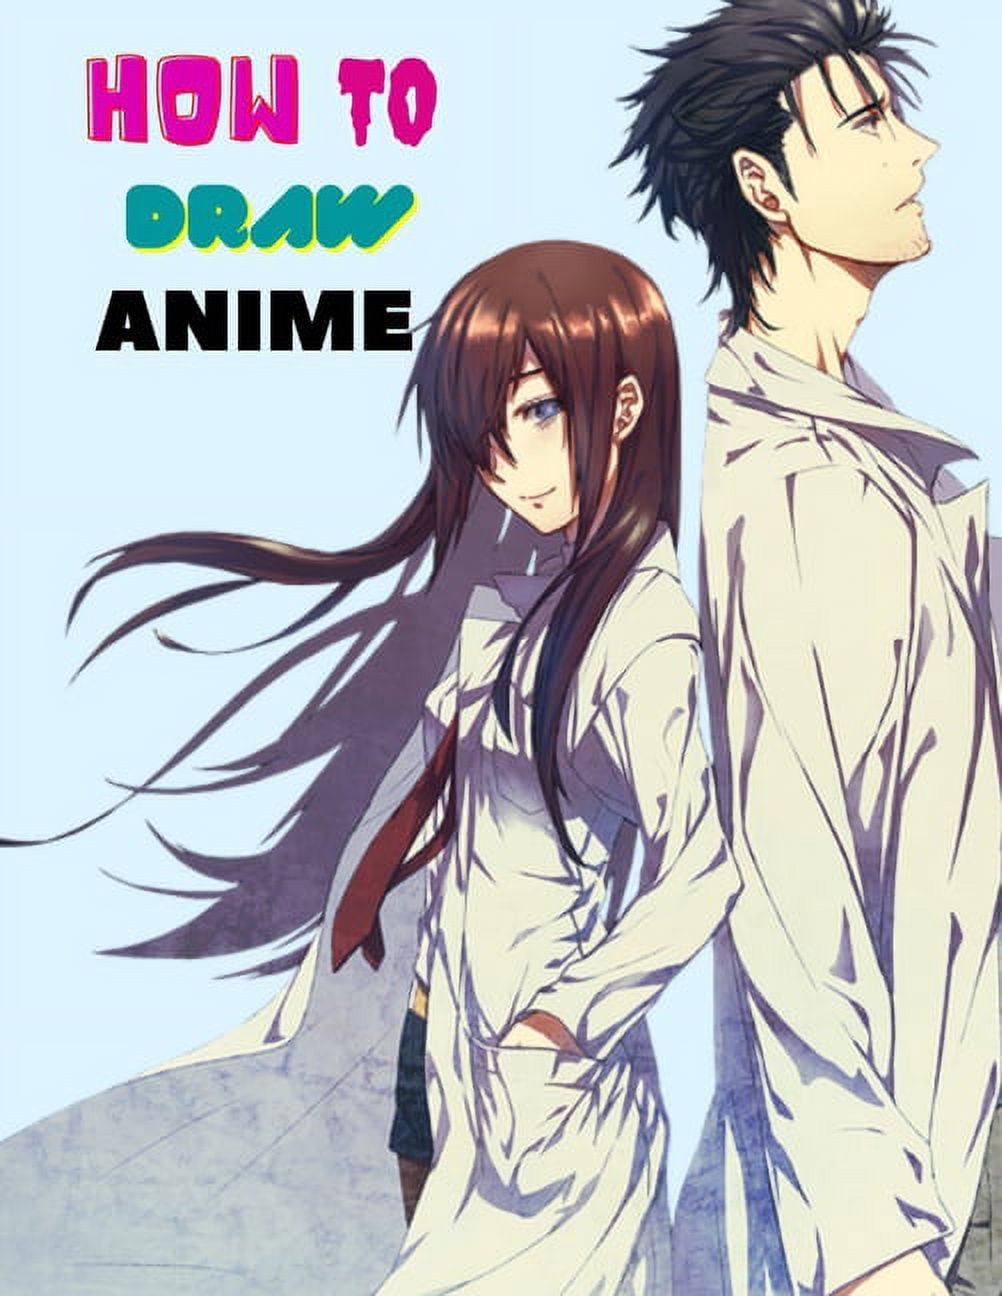 How to Draw Anime: Learn to Draw Anime and Manga Step by Step